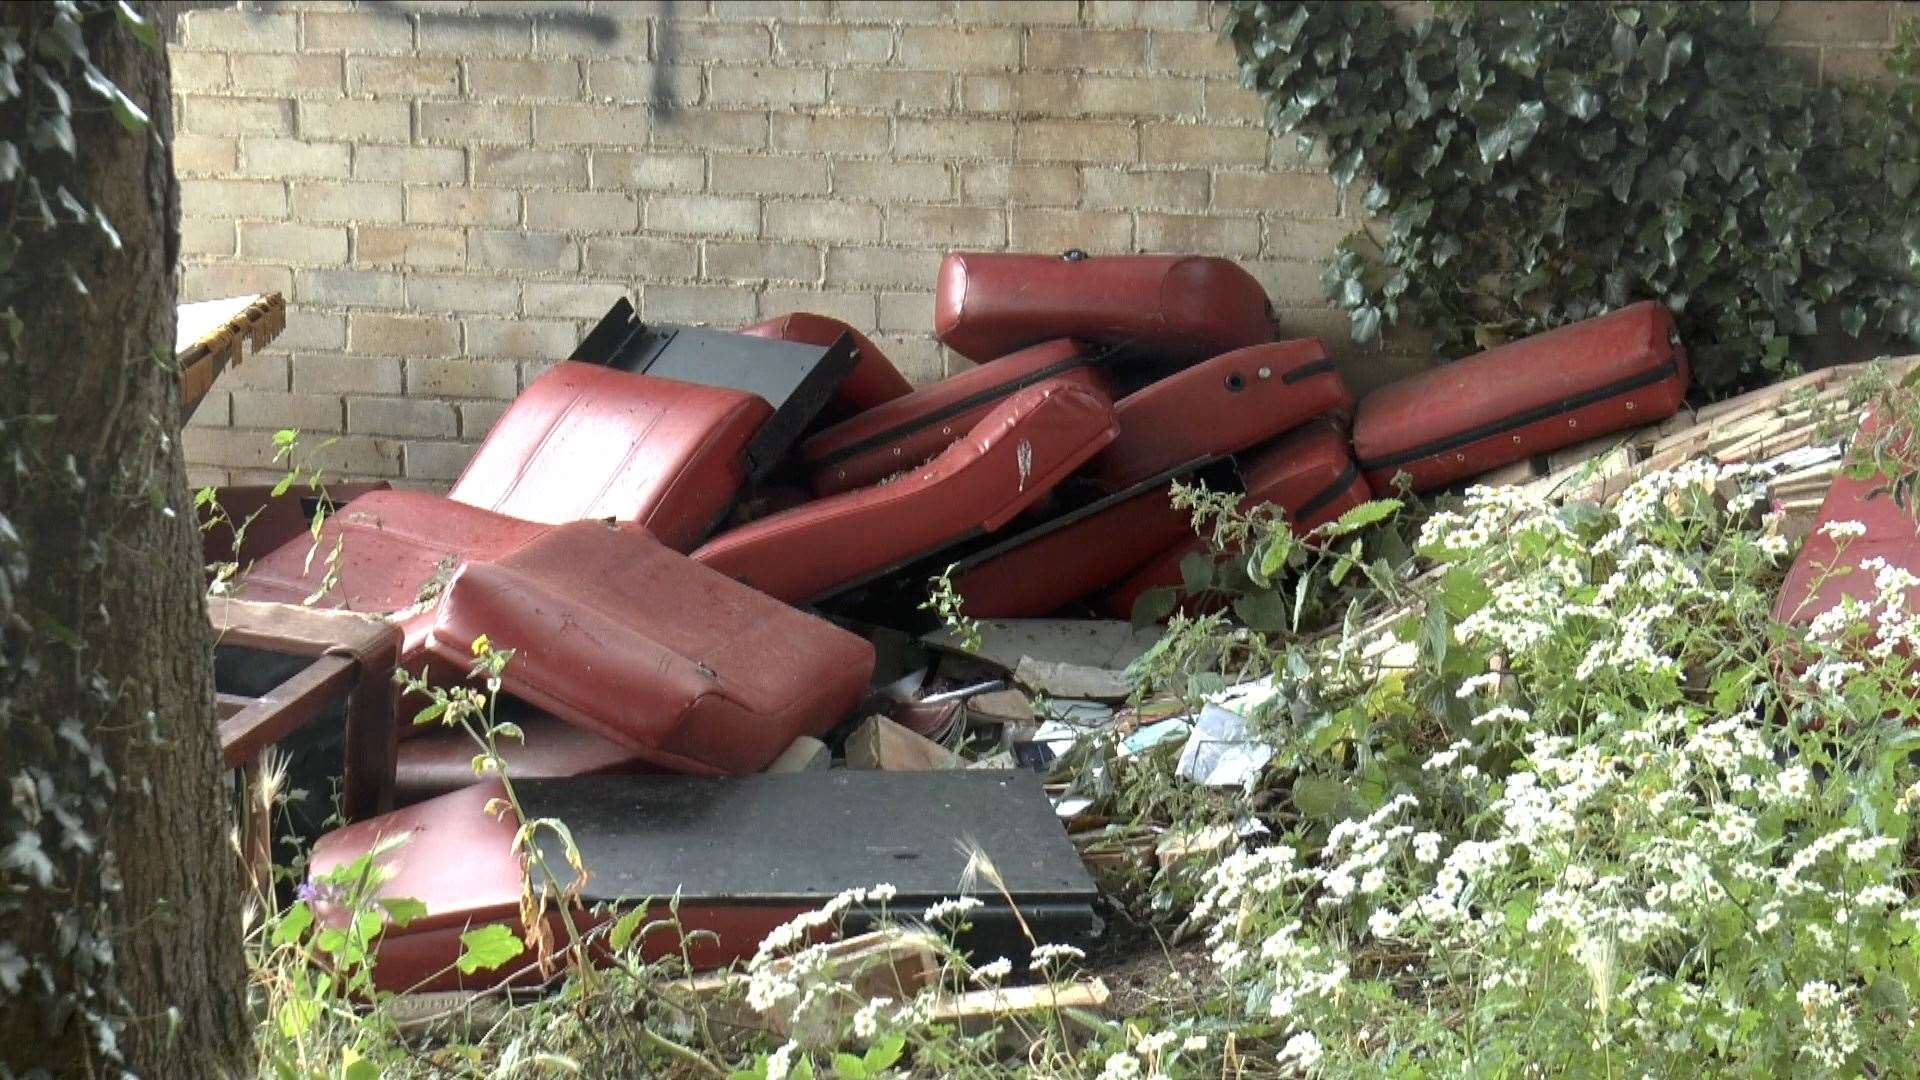 Unwanted office furniture piled high in the residential street